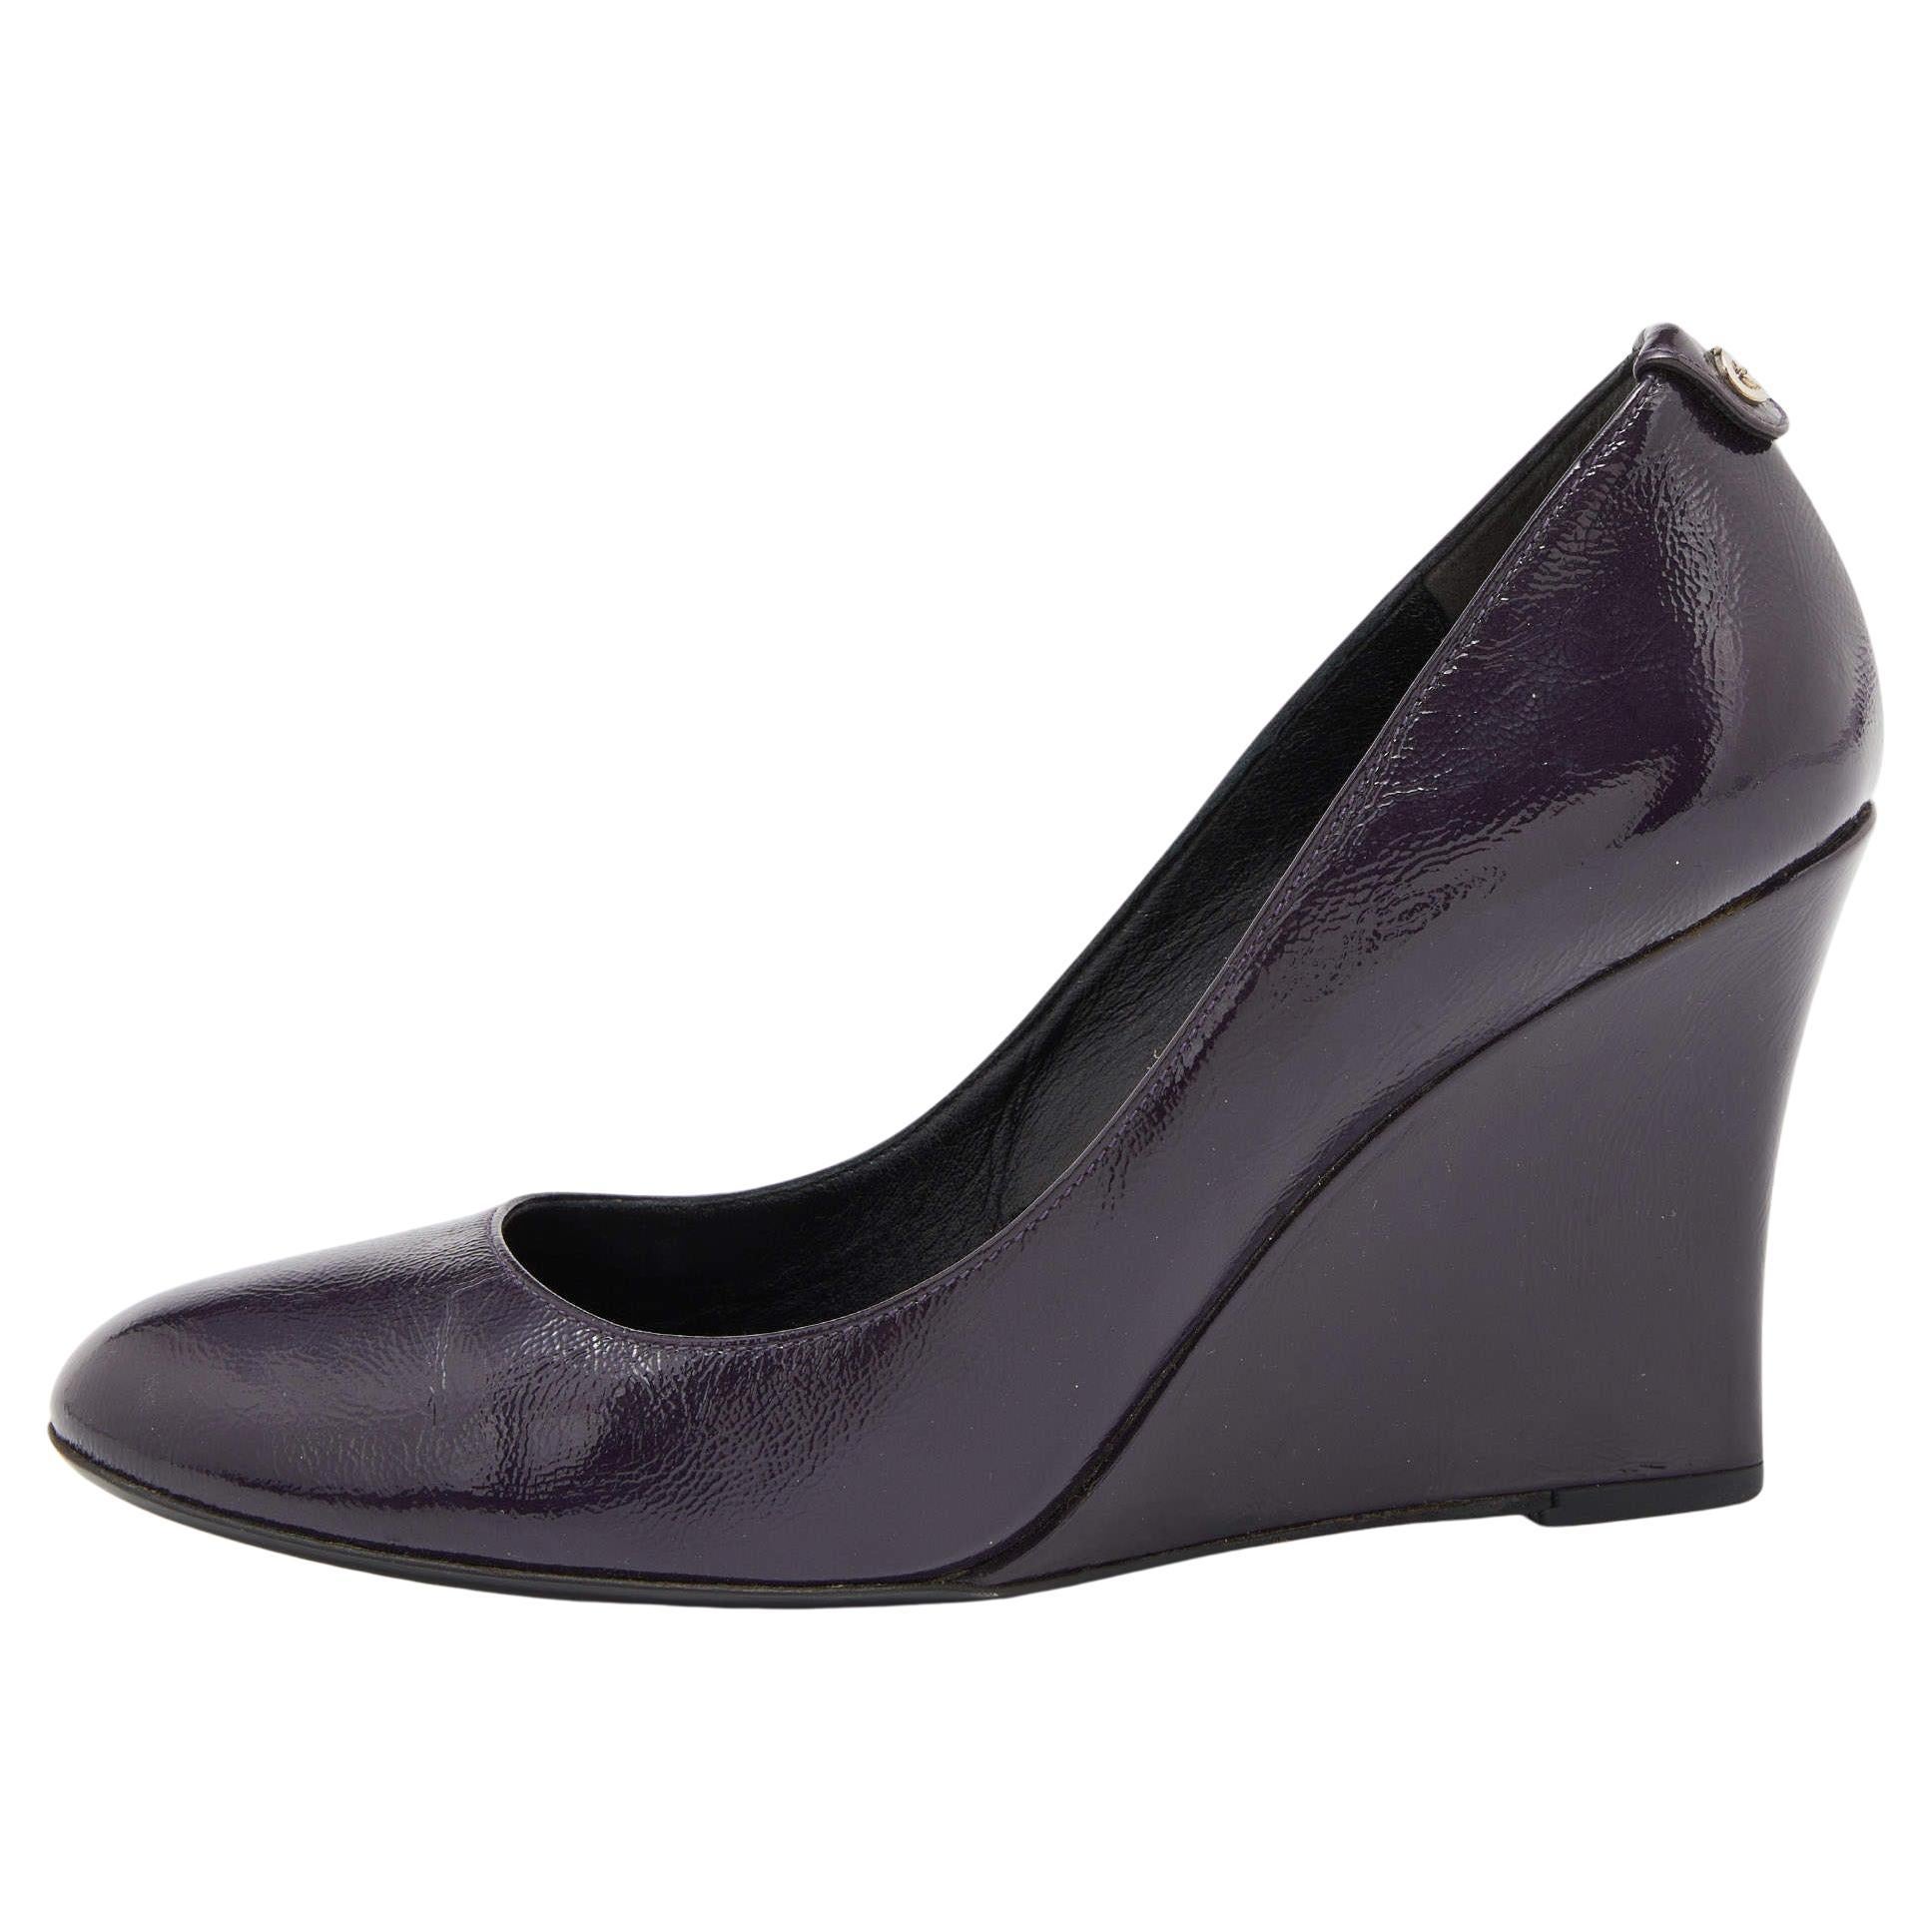 Gucci Purple Patent Leather Wedge Round Toe Pumps Size 36 For Sale